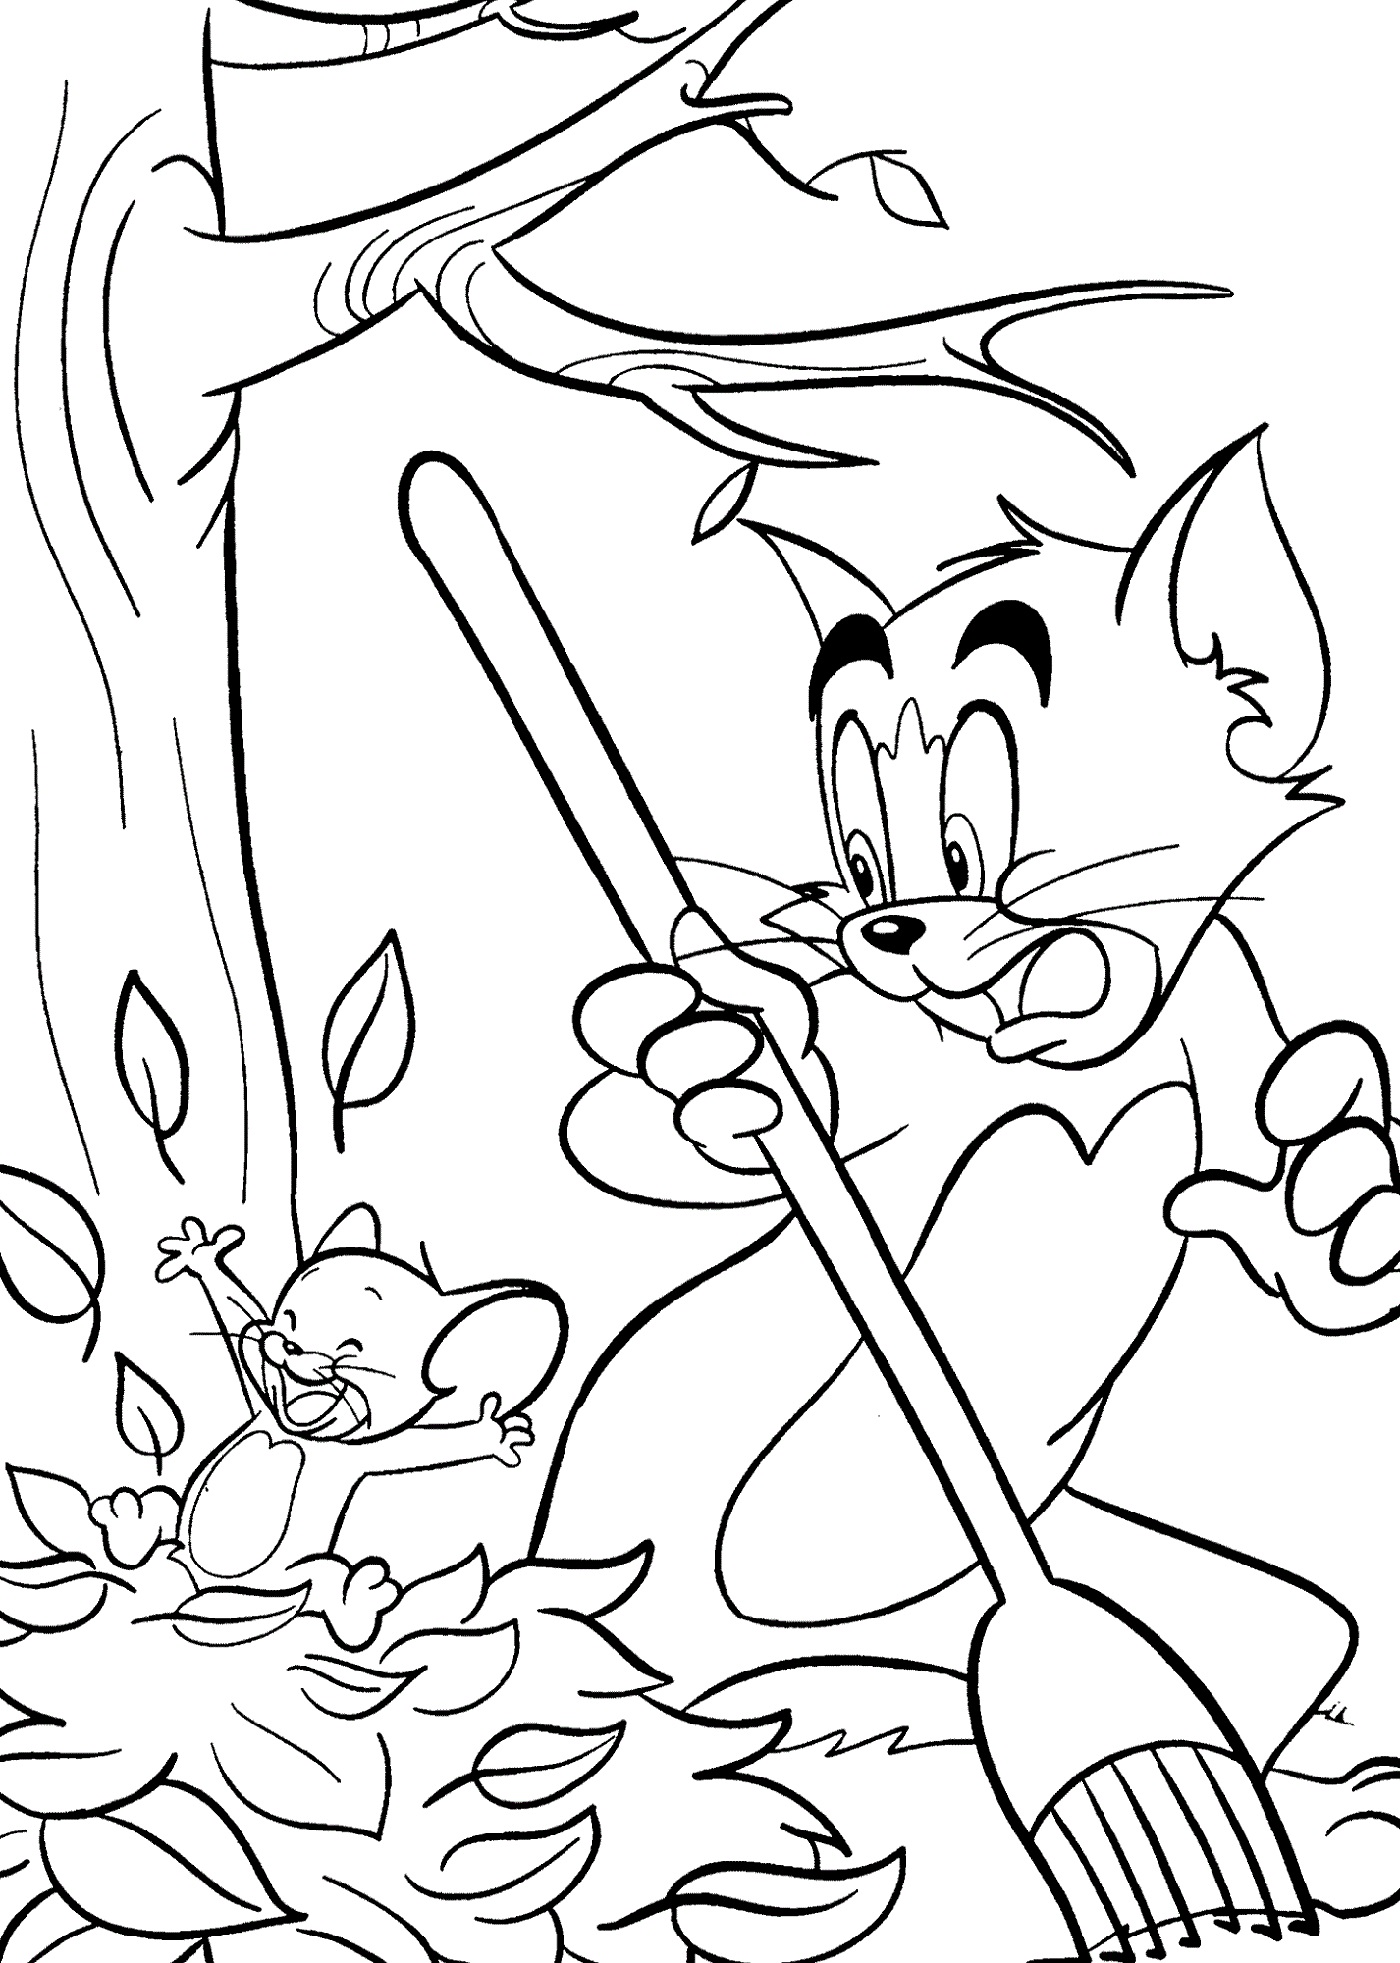 Tom and Jerry Fall Coloring Sheets